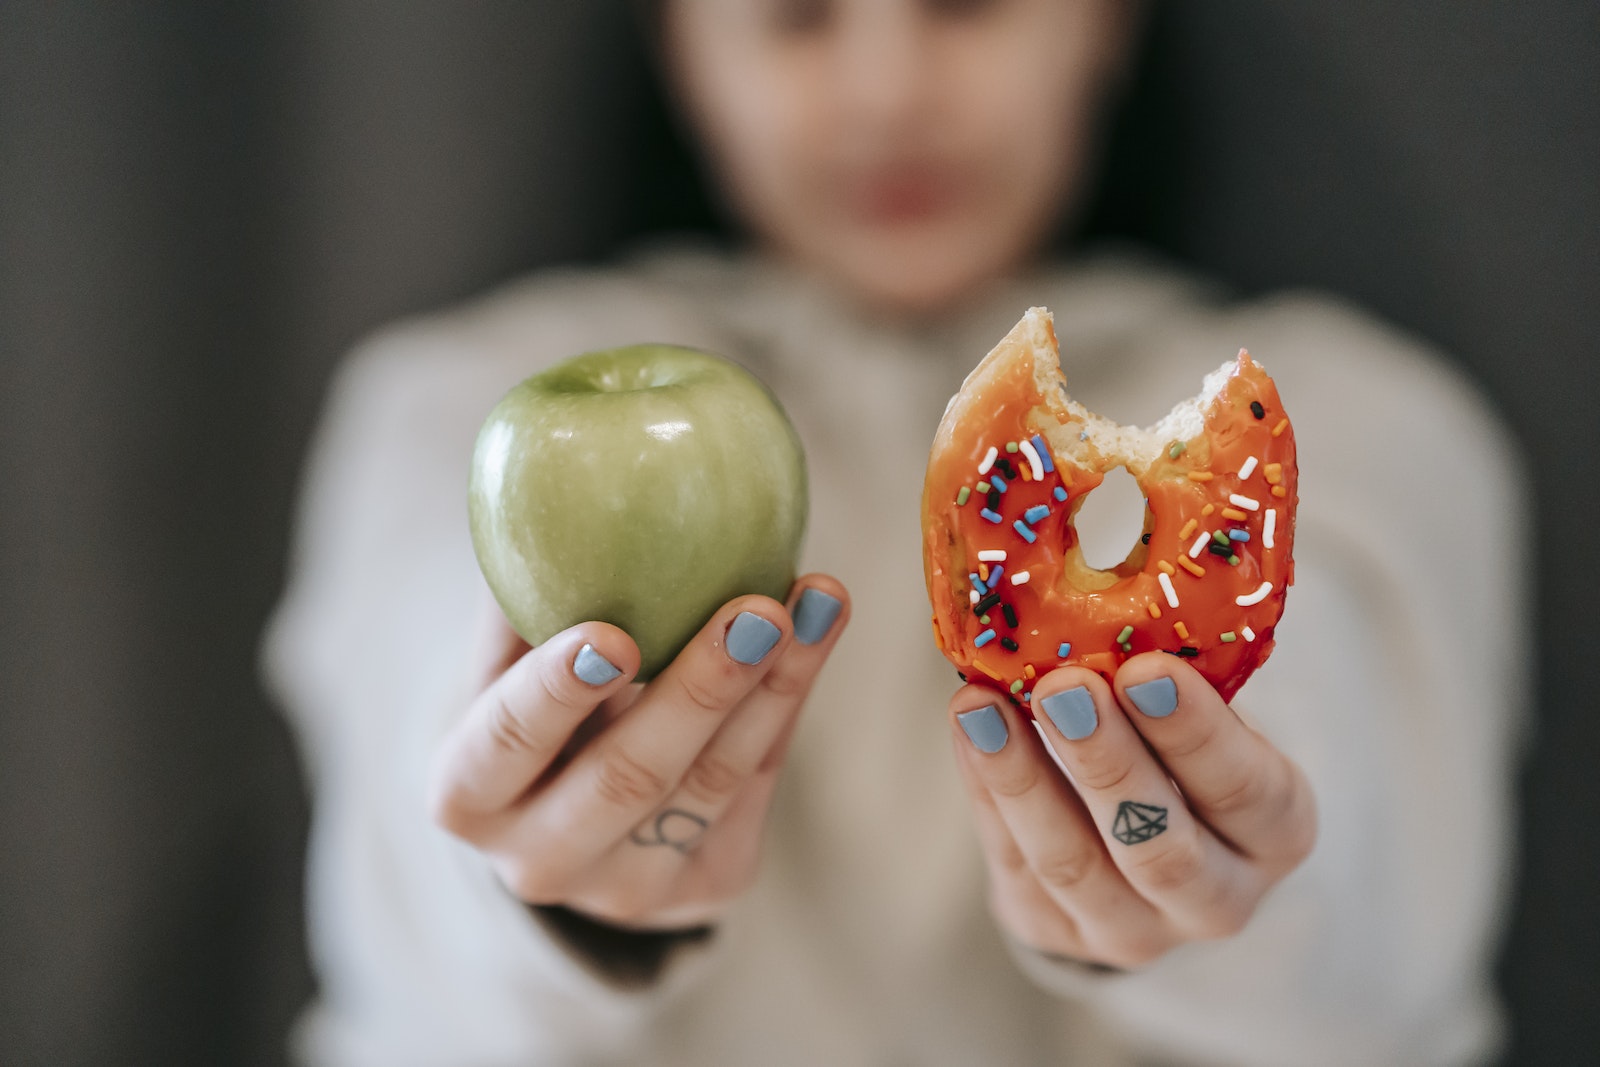 How to Stop Emotional Eating From Stress awareness